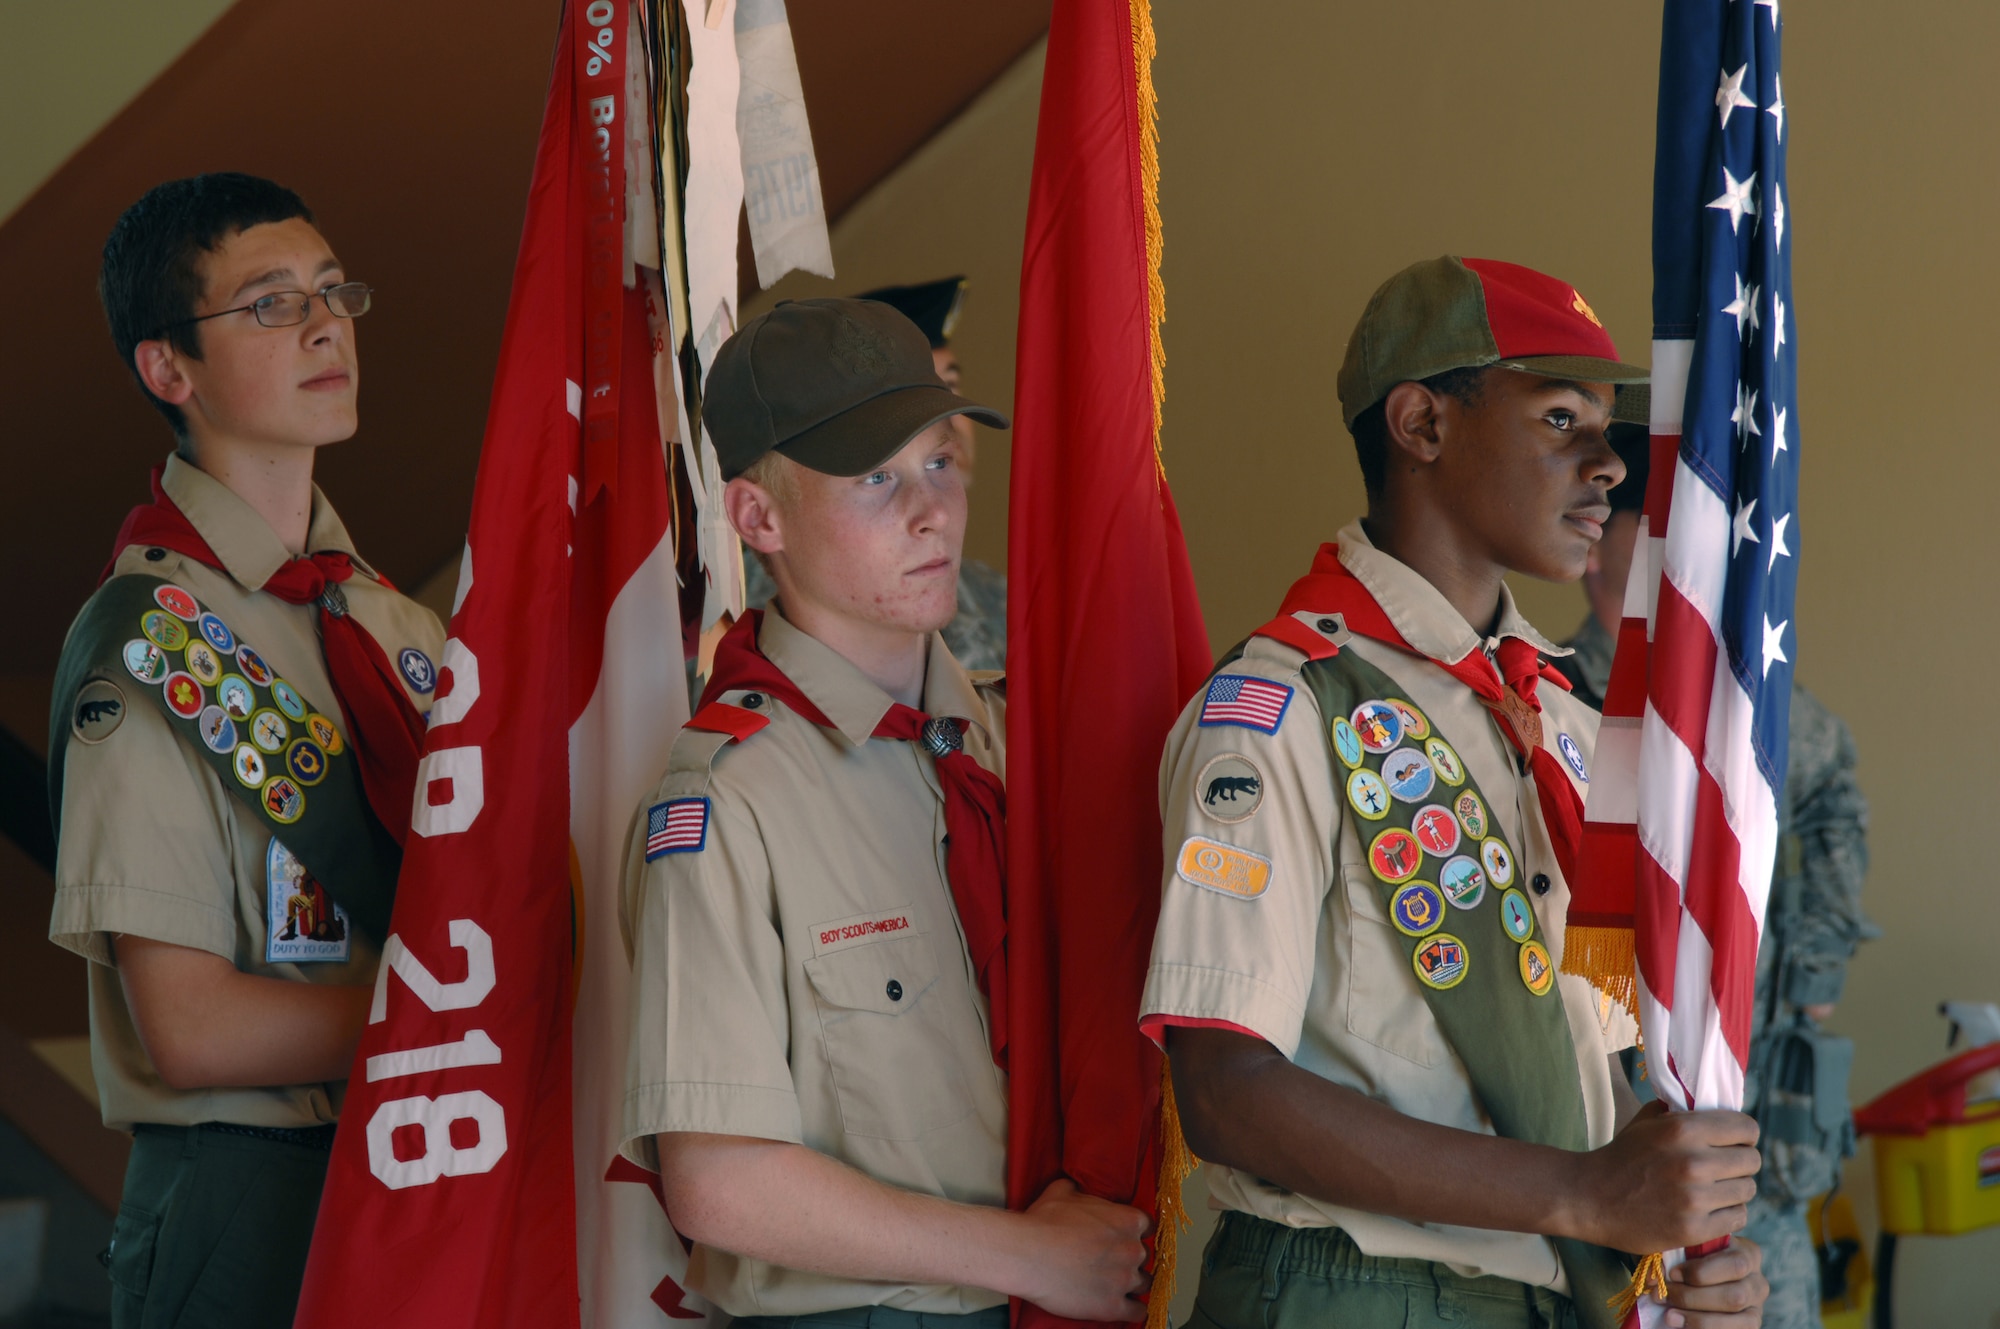 Joshua Molnar, Nicholas Pelkey and Mitchell Sims, members of Boy Scout Troop 218 color guard prepare to post the colors Wednesday, June 3, 2009 at the Ira Eldridge Memorial Re-dedication Ceremony at Incirlik Unit School, Incirlik Air Base, Turkey. The troop honored the memory of Eagle Scout Eldridge who died in 2001 of leukemia. Ira Eldridge was also the class of 1999 valedictorian at Incirlik Unit School, vice president of the Incirlik Unit School National Honor Society and a member of the varsity soccer team. A memorial plaque was placed on school grounds, but fell into disrepair over the years.  The scouts decided it needed to be resurrected and placed in a more prominent location so current and future generations would not forget him. (U.S. Air Force photo/ Staff Sgt. Lauren Padden)